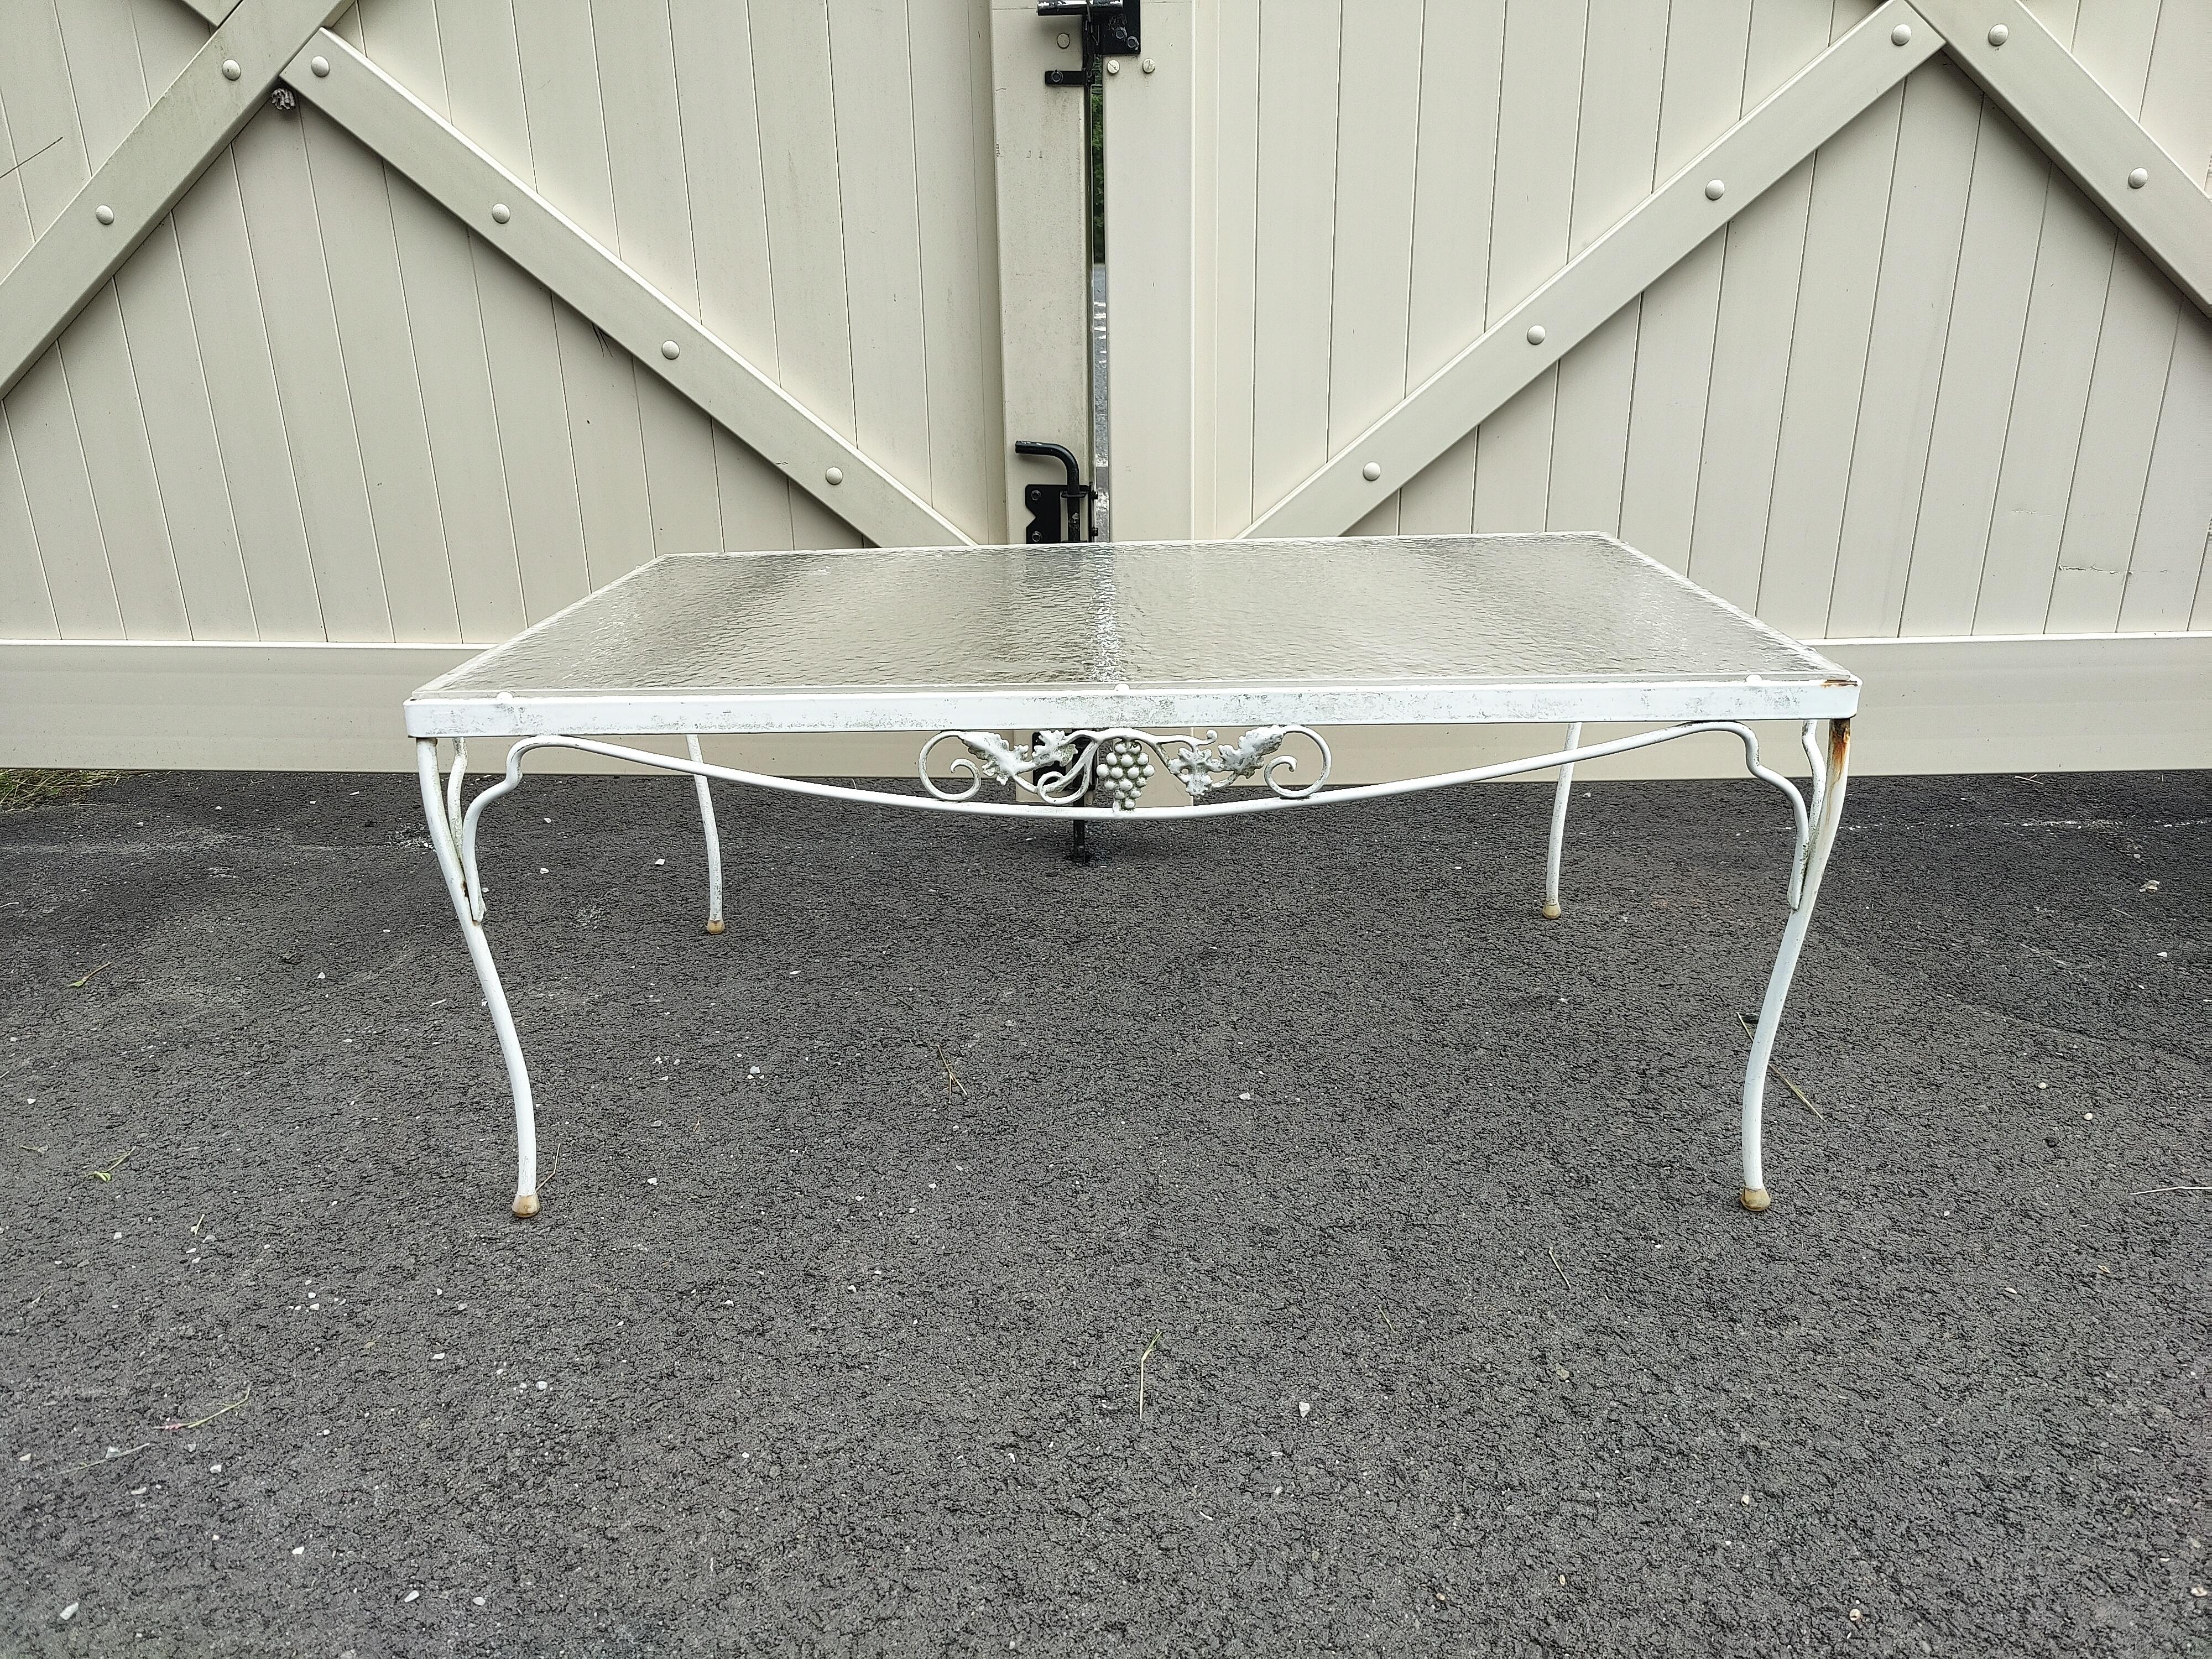 Mid-century Floral patio table. Made out of sturdy wrought iron with a plexi glass top. This table features elegant scrollwork and floral designs, Perfect for any patio, pool, balcony setting.

(Please confirm item location - NY or NJ - with